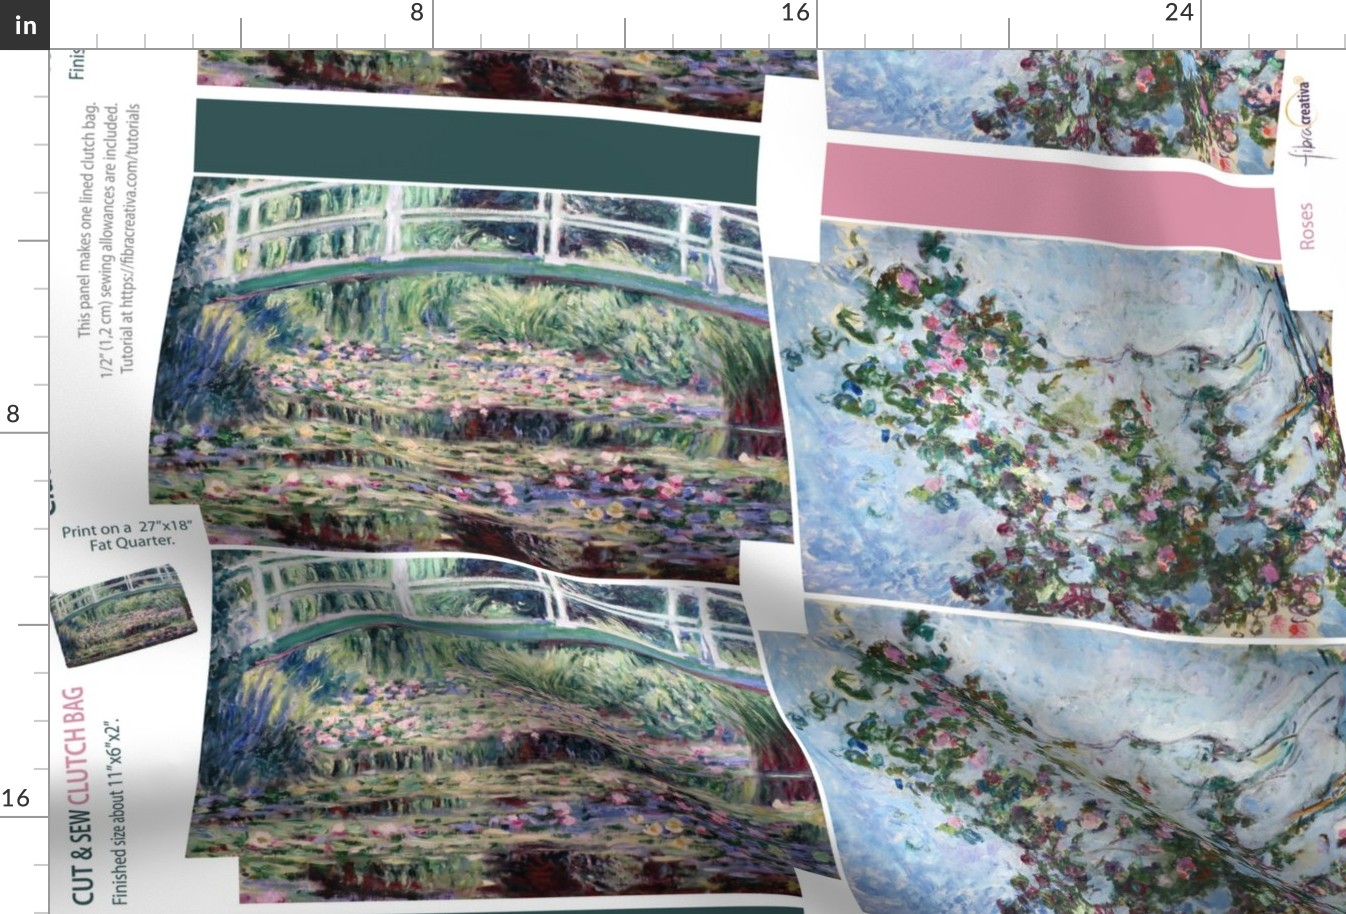 Claude Monet cut and sew clutch bag // The Japanese Footbridge and Roses